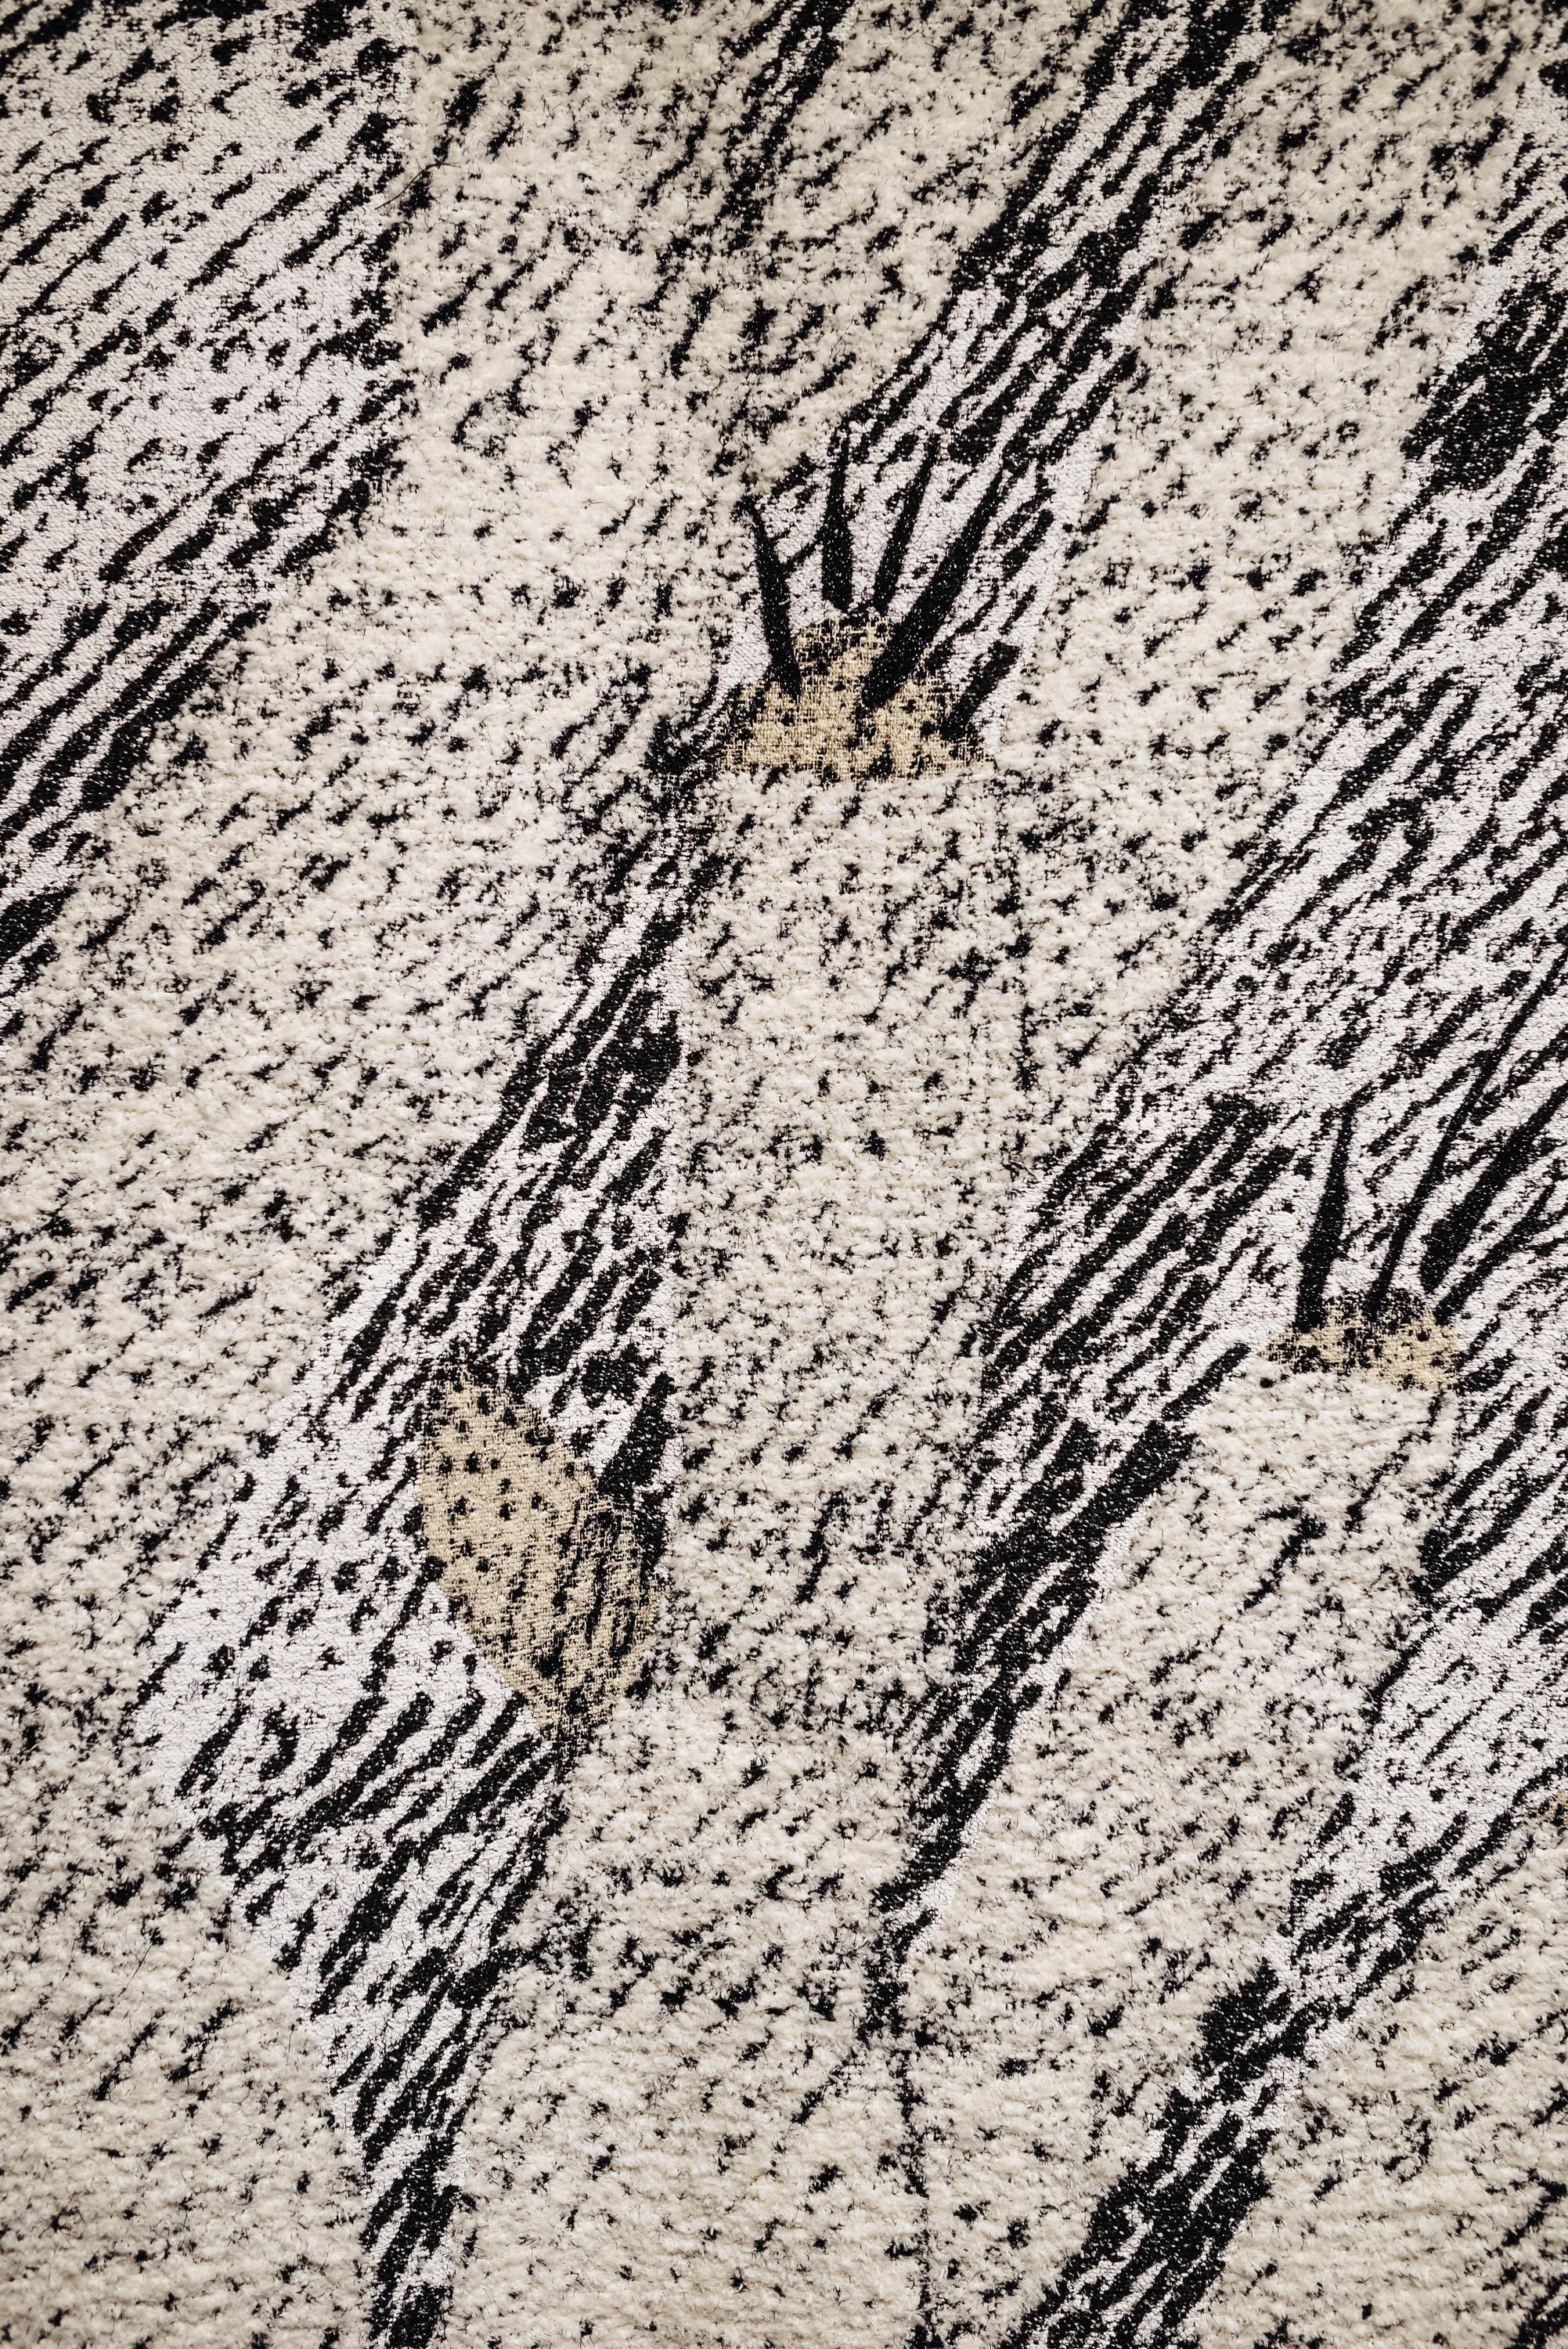 Ugo La Pietra Artificial Nature #1 cotton silk virgin wool tapestry

Ugo La Pietra presents his tapestries as a decorative exercise in homage to the “garden”; these works represent for the author one of the many exercises he developed already in